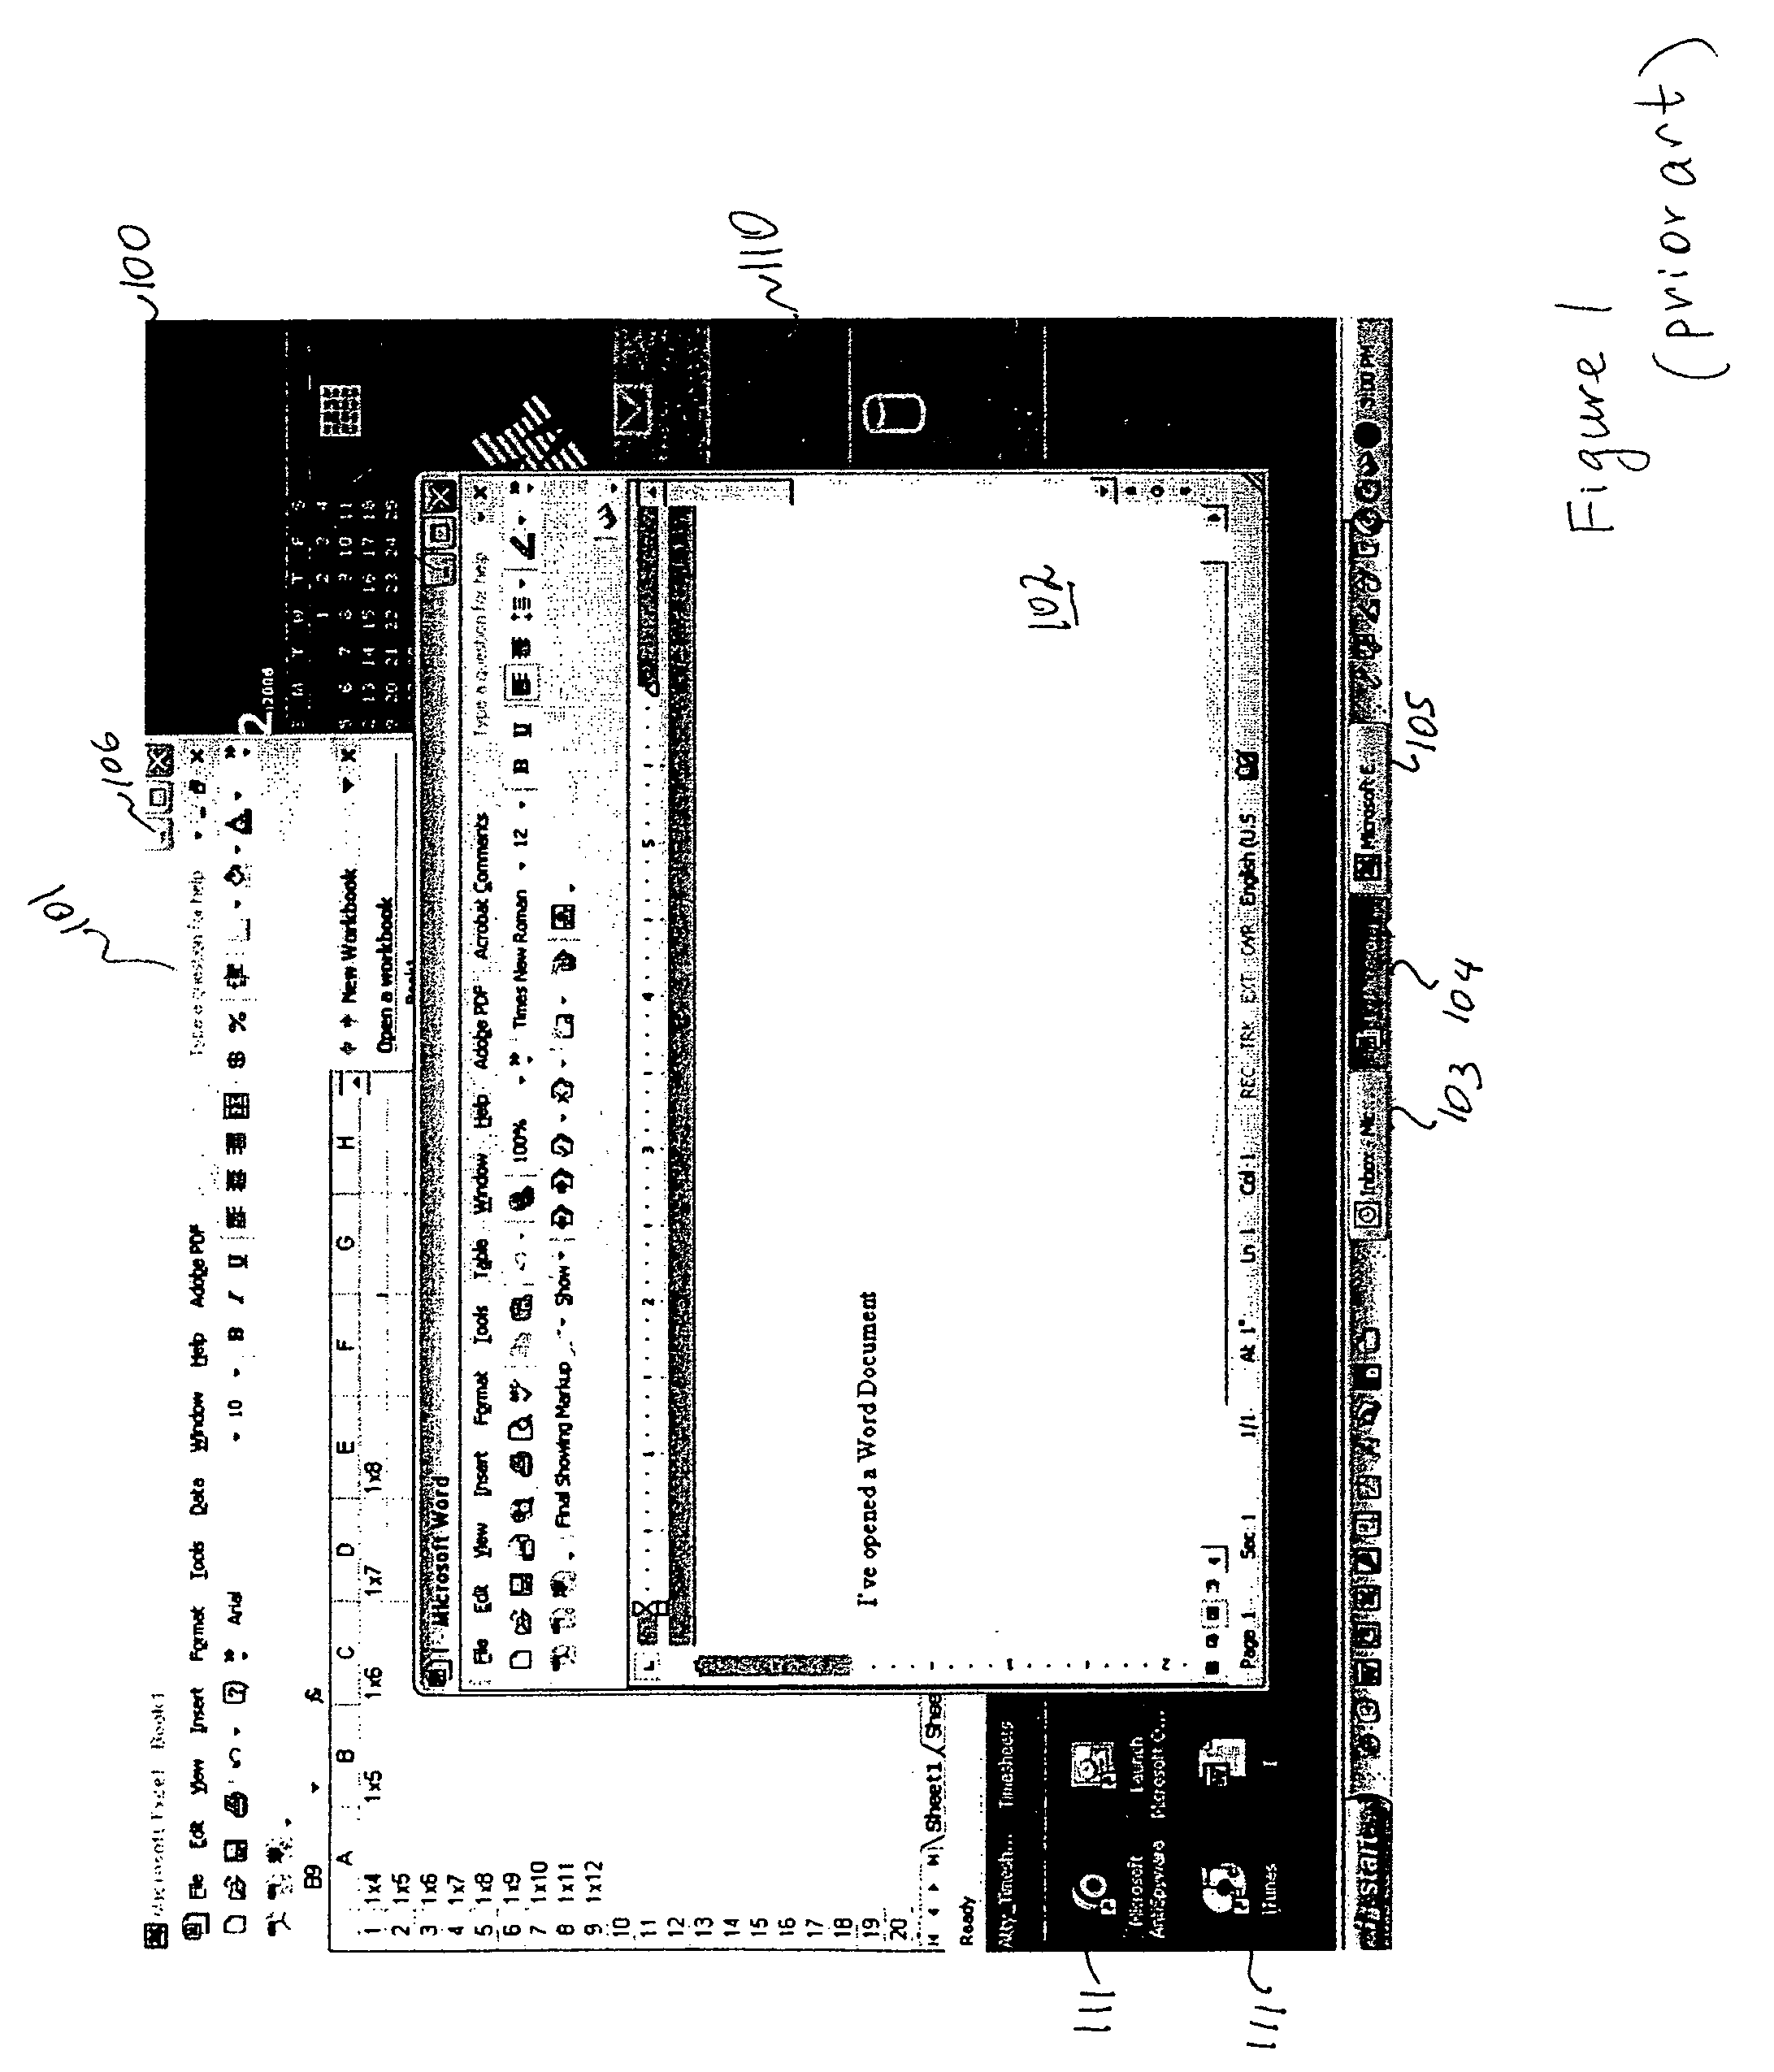 Methods of manipulating a screen space of a display device